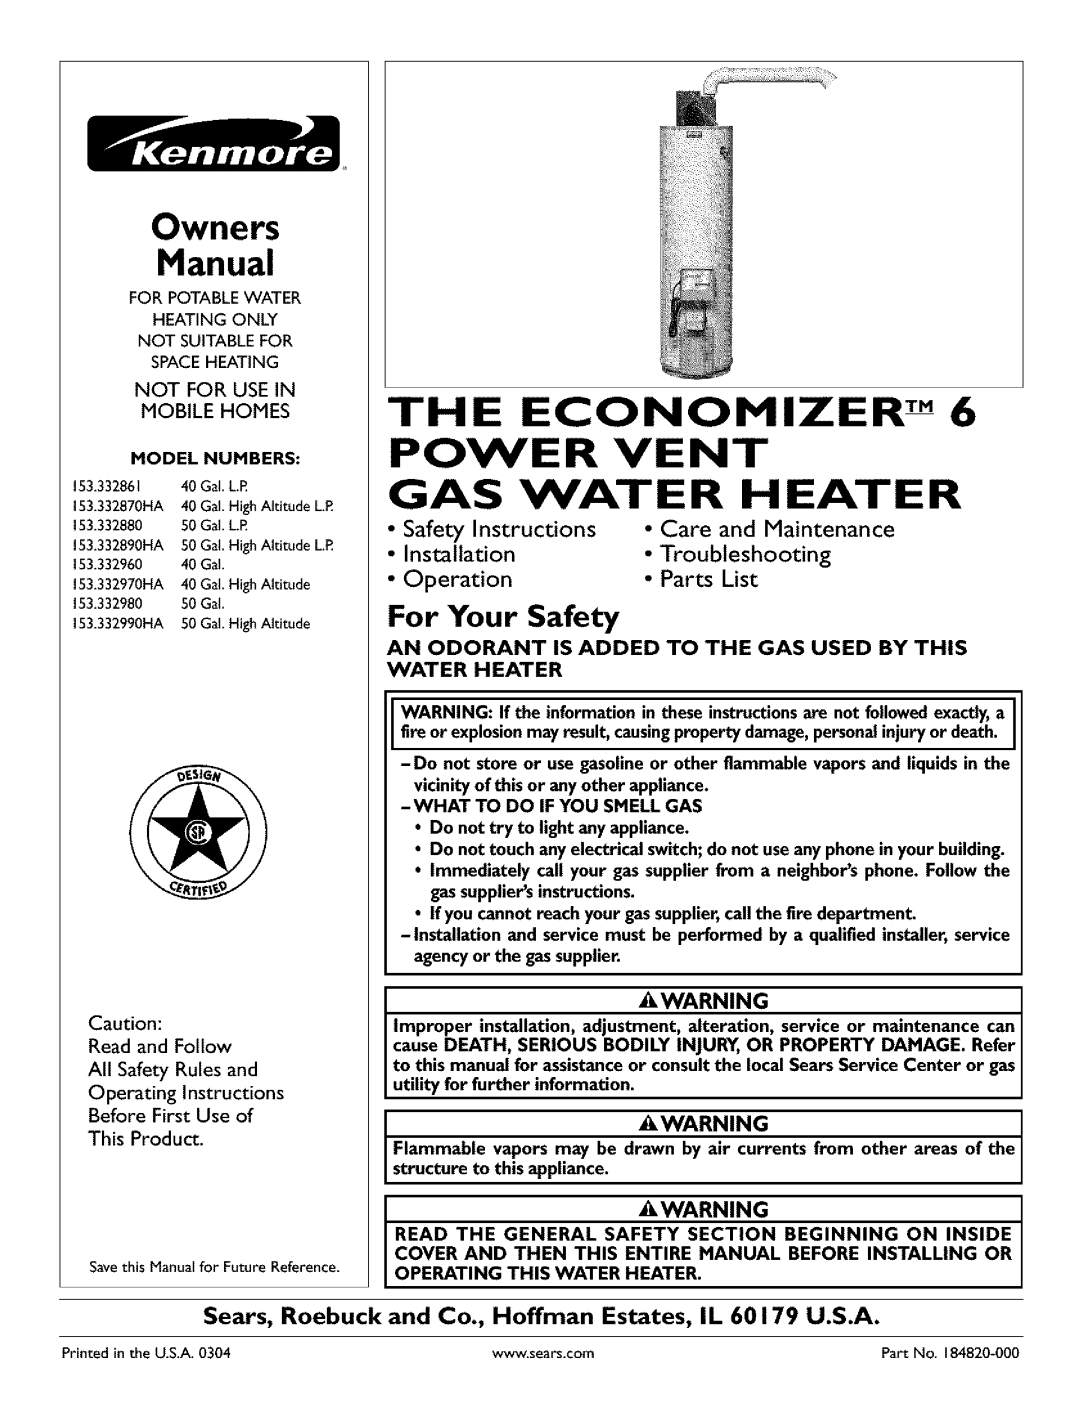 Kenmore 153.332870HA, 153.33296 owner manual For Your Safety, Installation, Power Vent, Gas Water Heater, Owners, Manual 